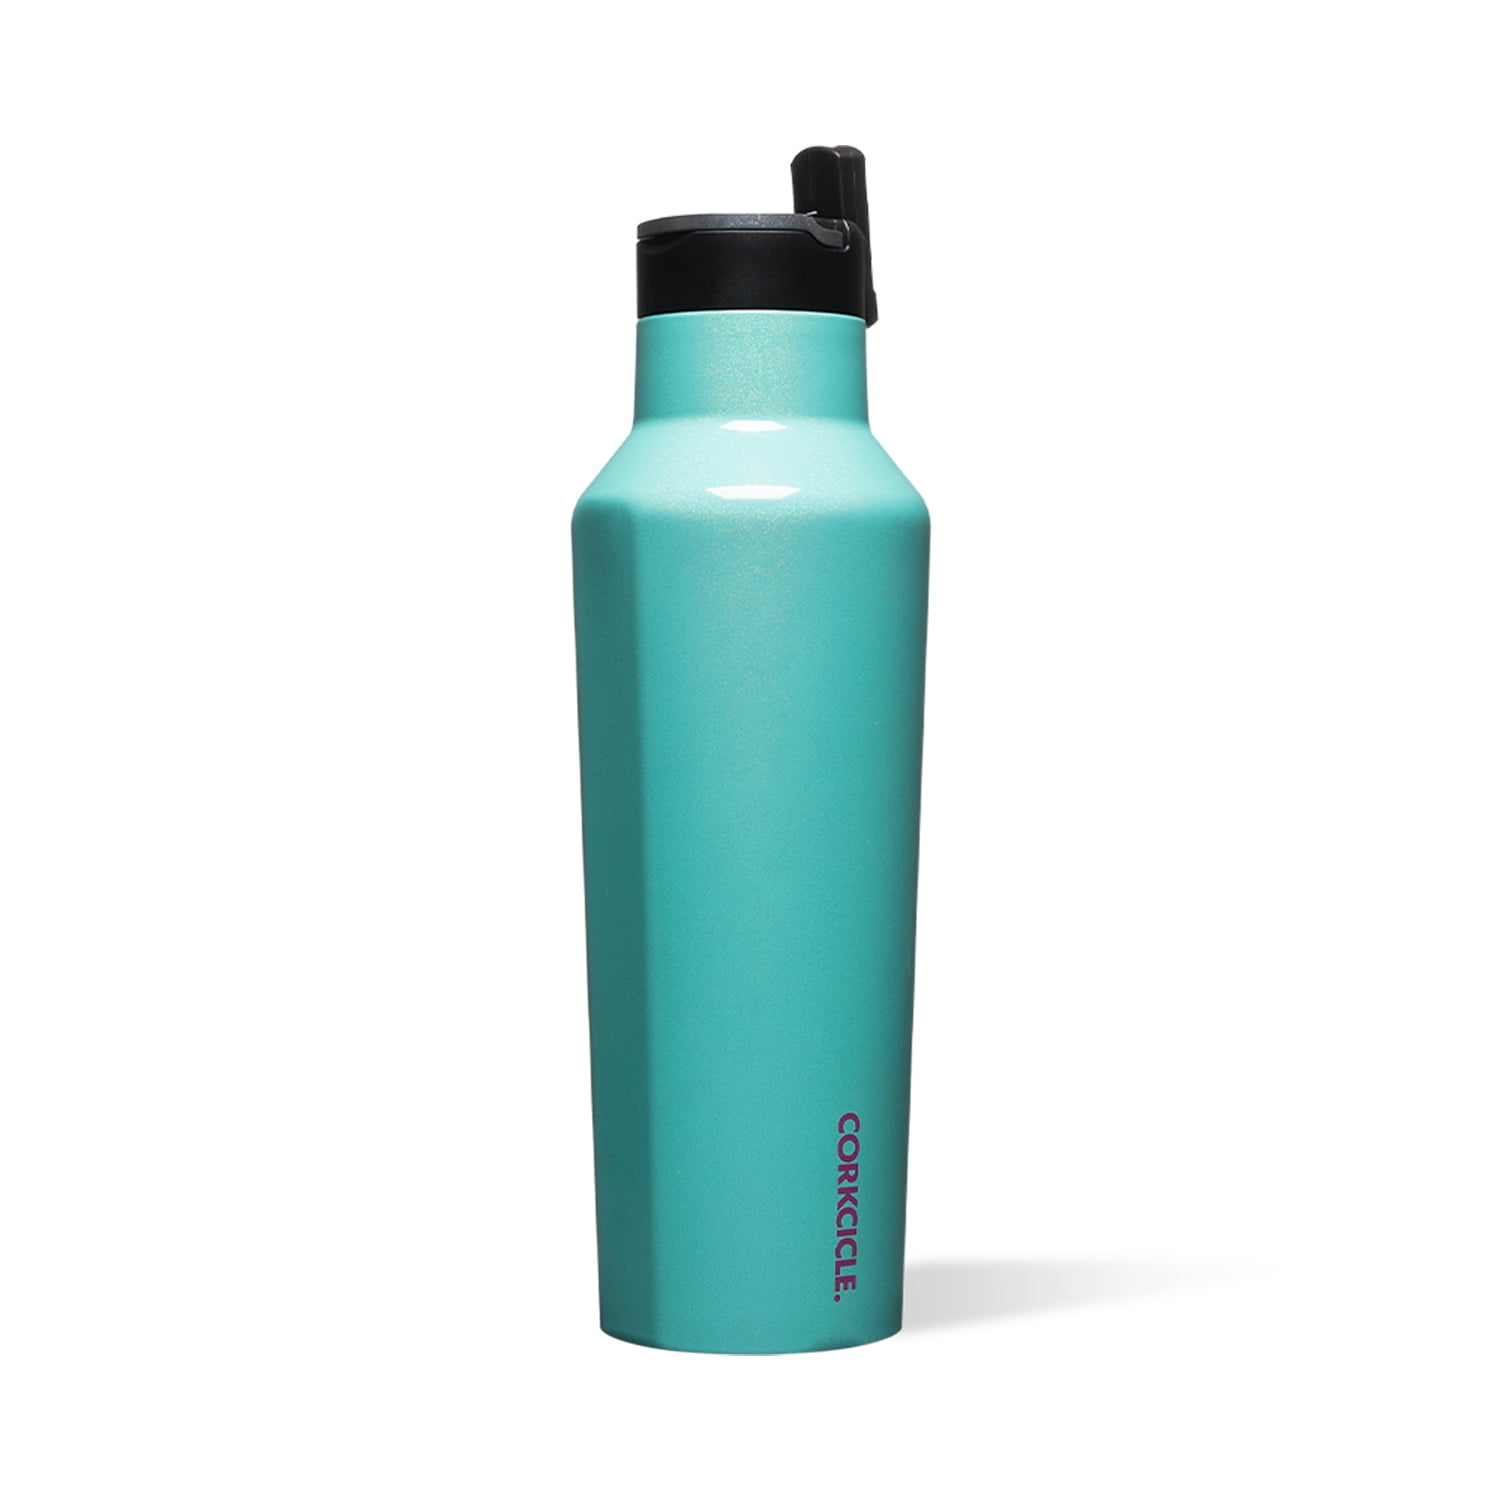 Corkcicle Canteen Cap with Straw, for 20 oz and 40 oz Canteens